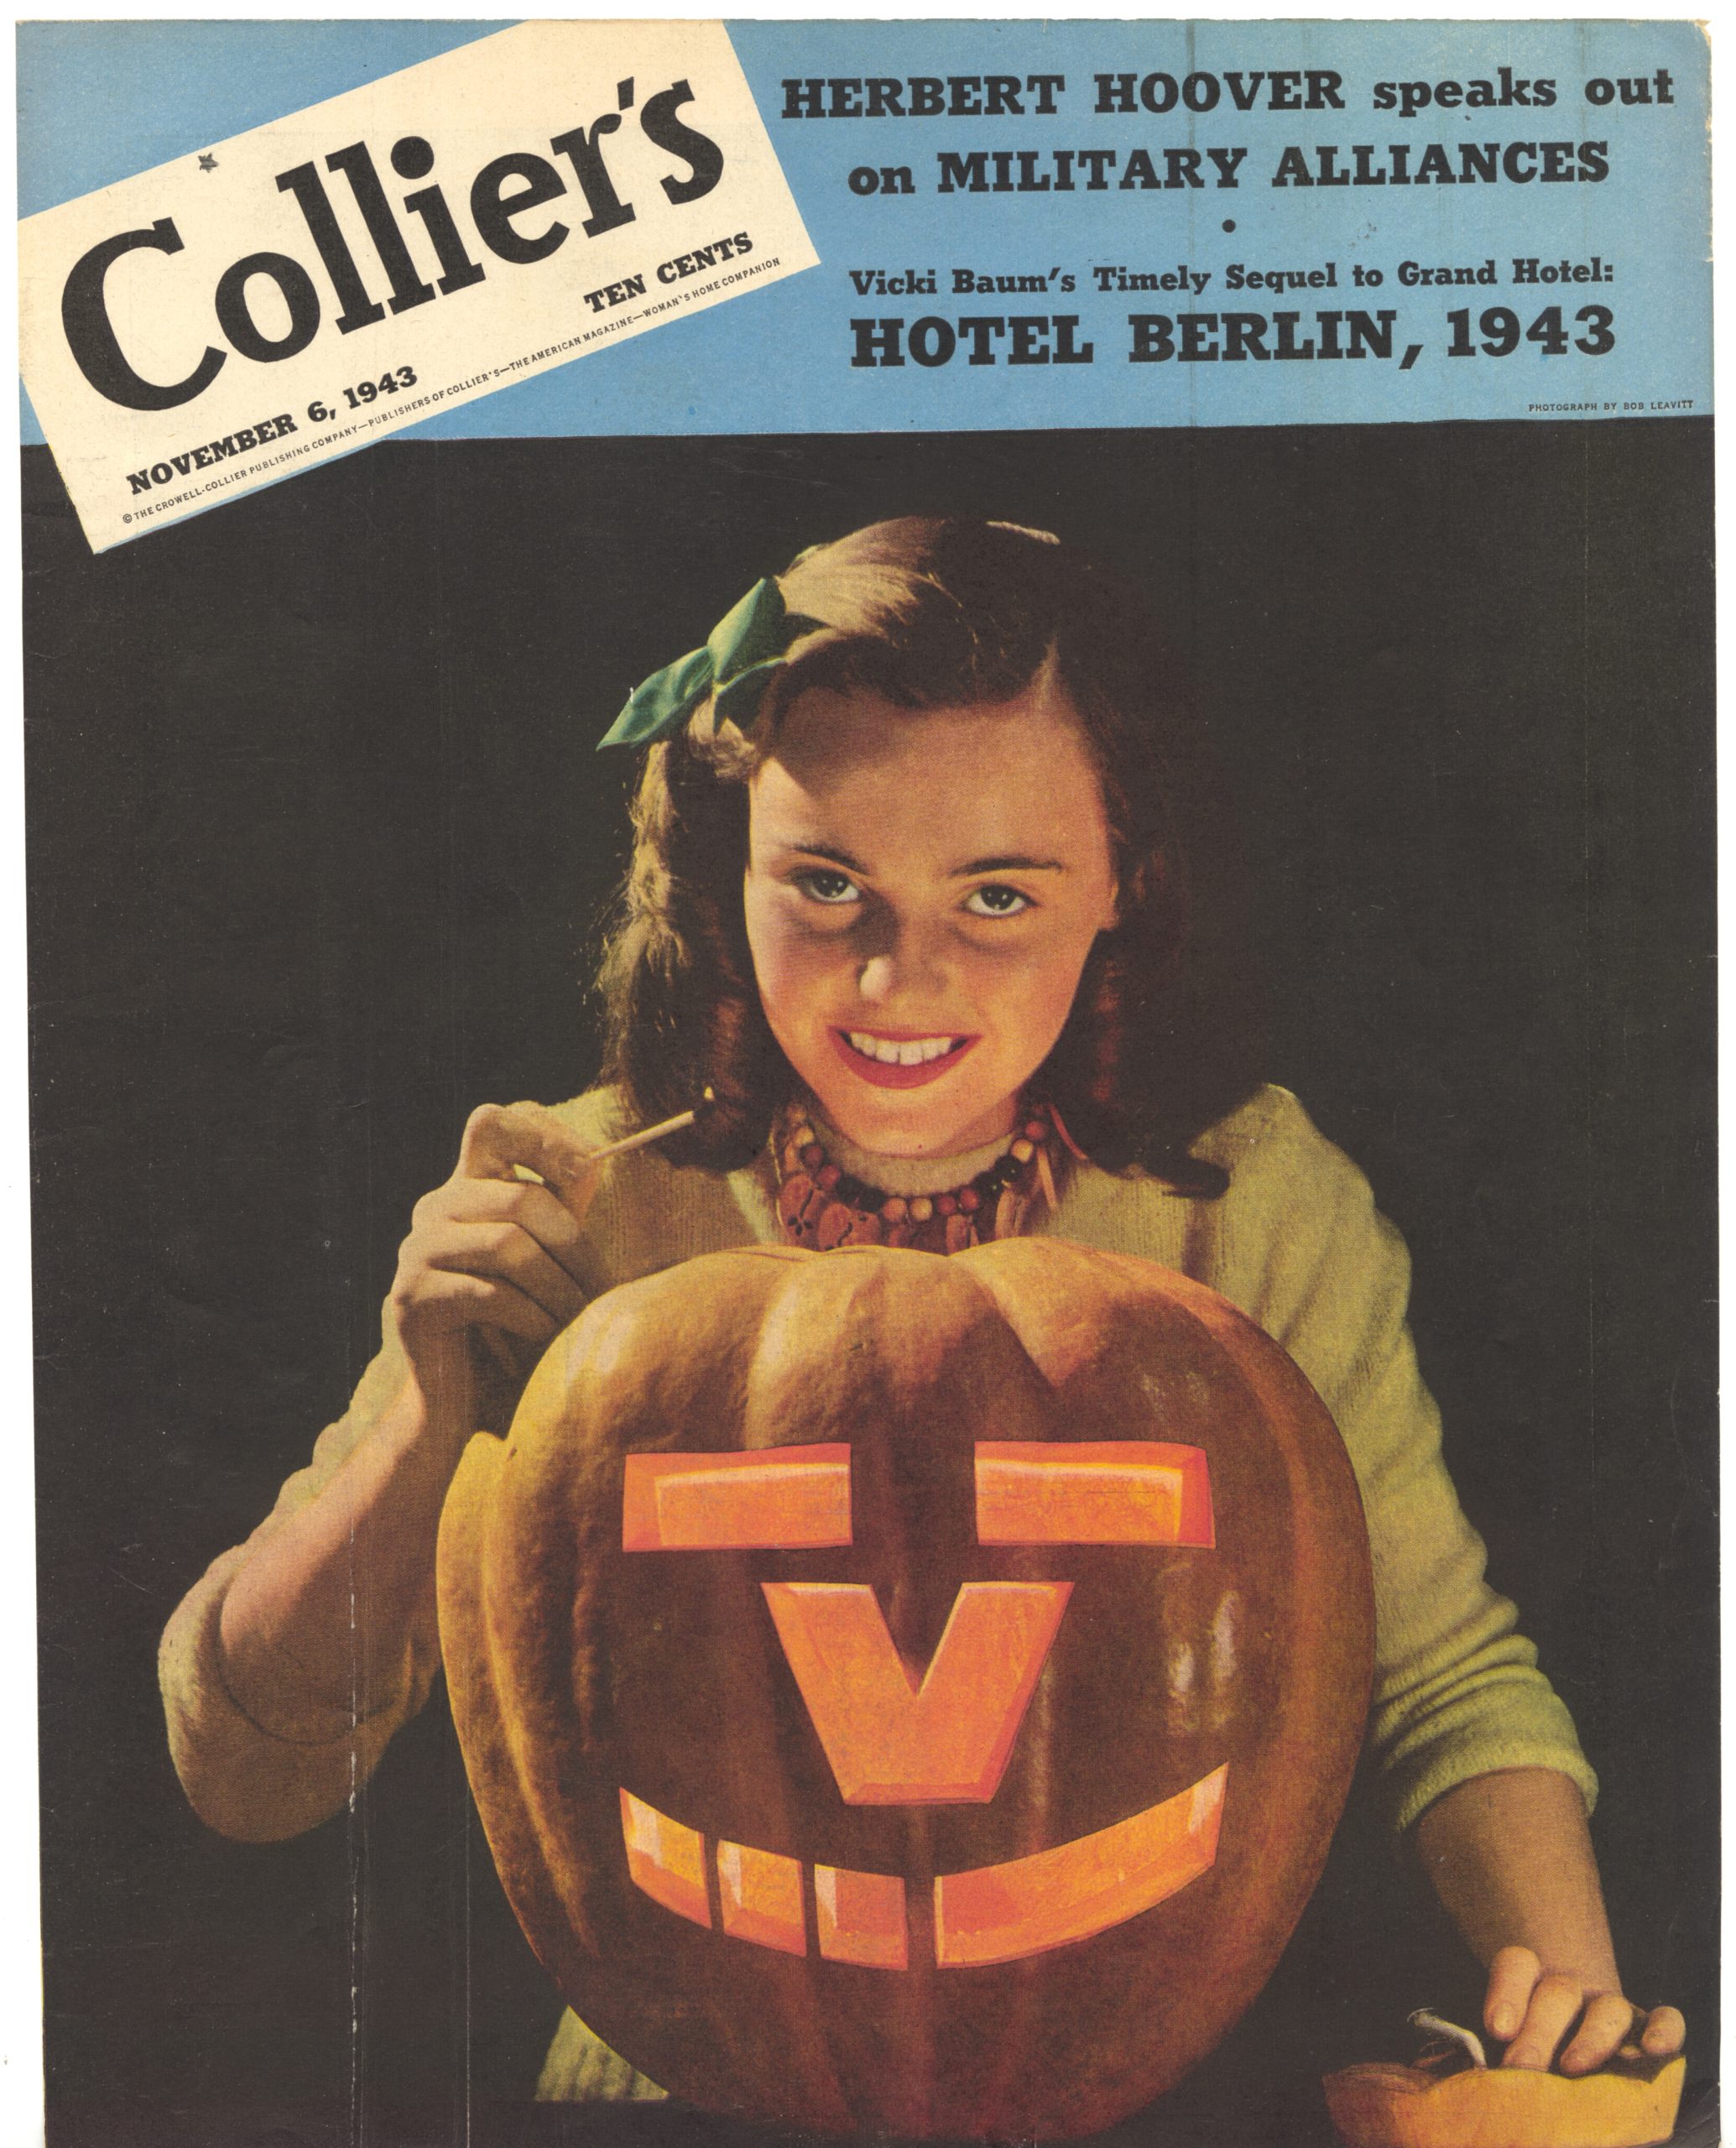 A Jack O’Lantern with a “V for Victory” face, cover of Colliers, November 6, 1943.